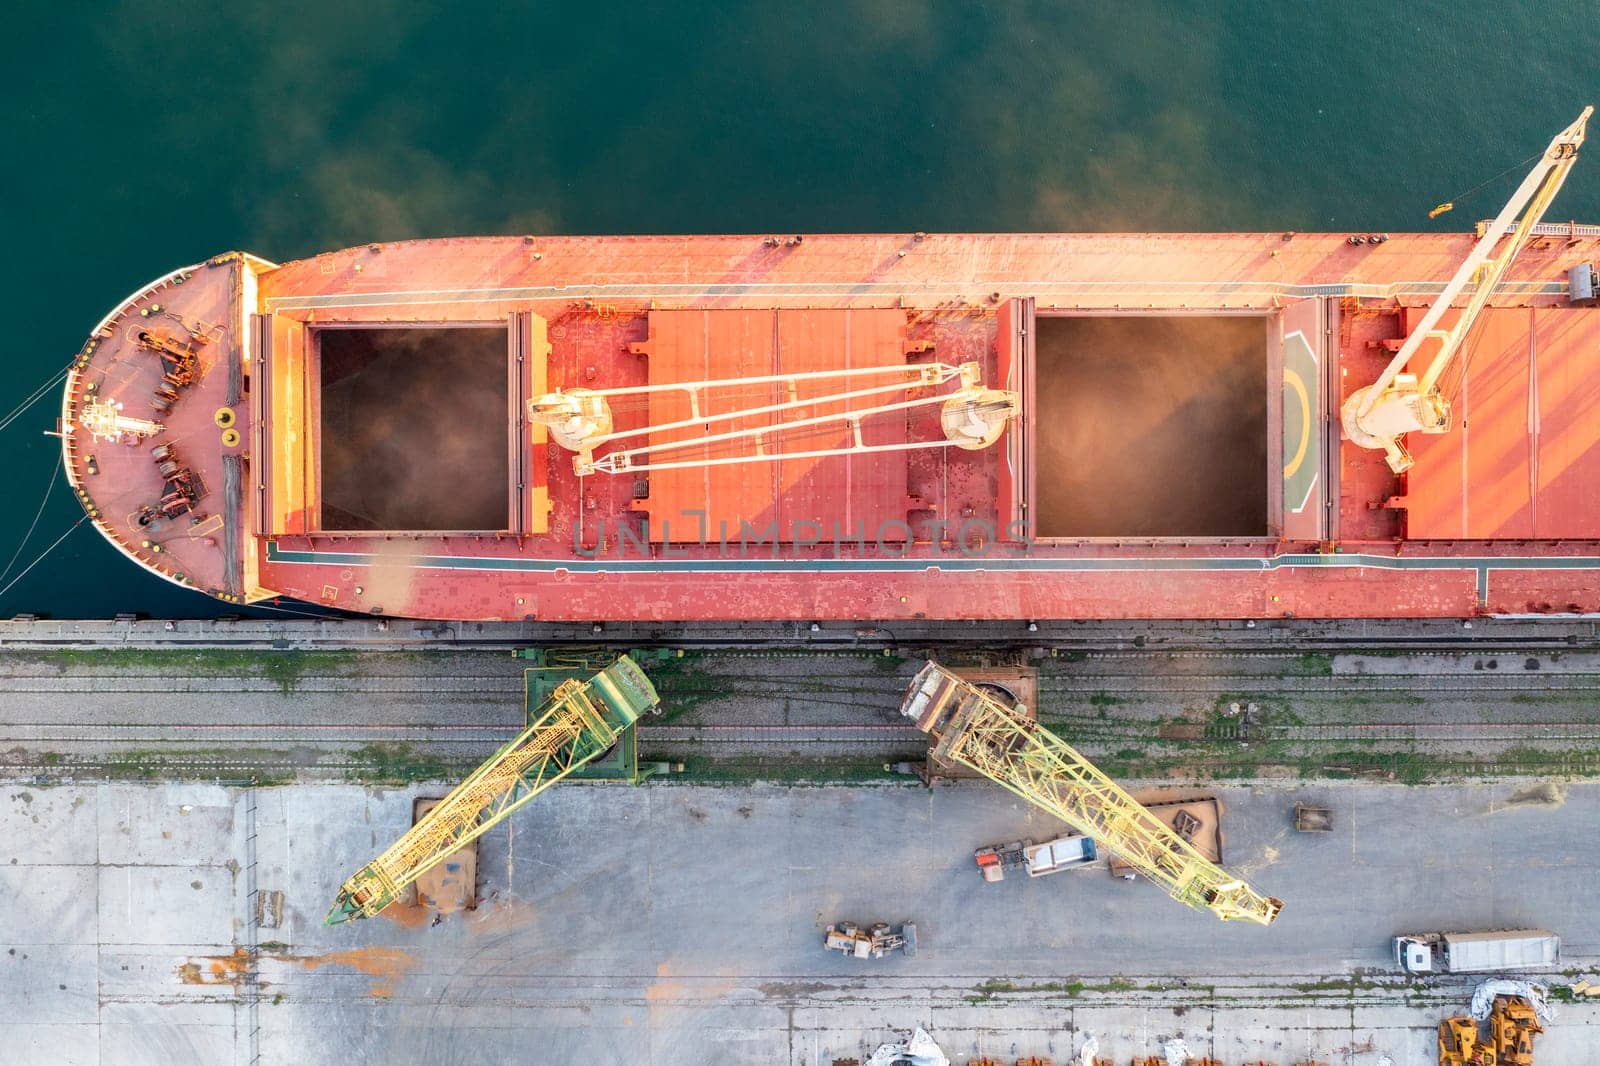 Top view from a drone of a large ship loading grain for export. Water transport 